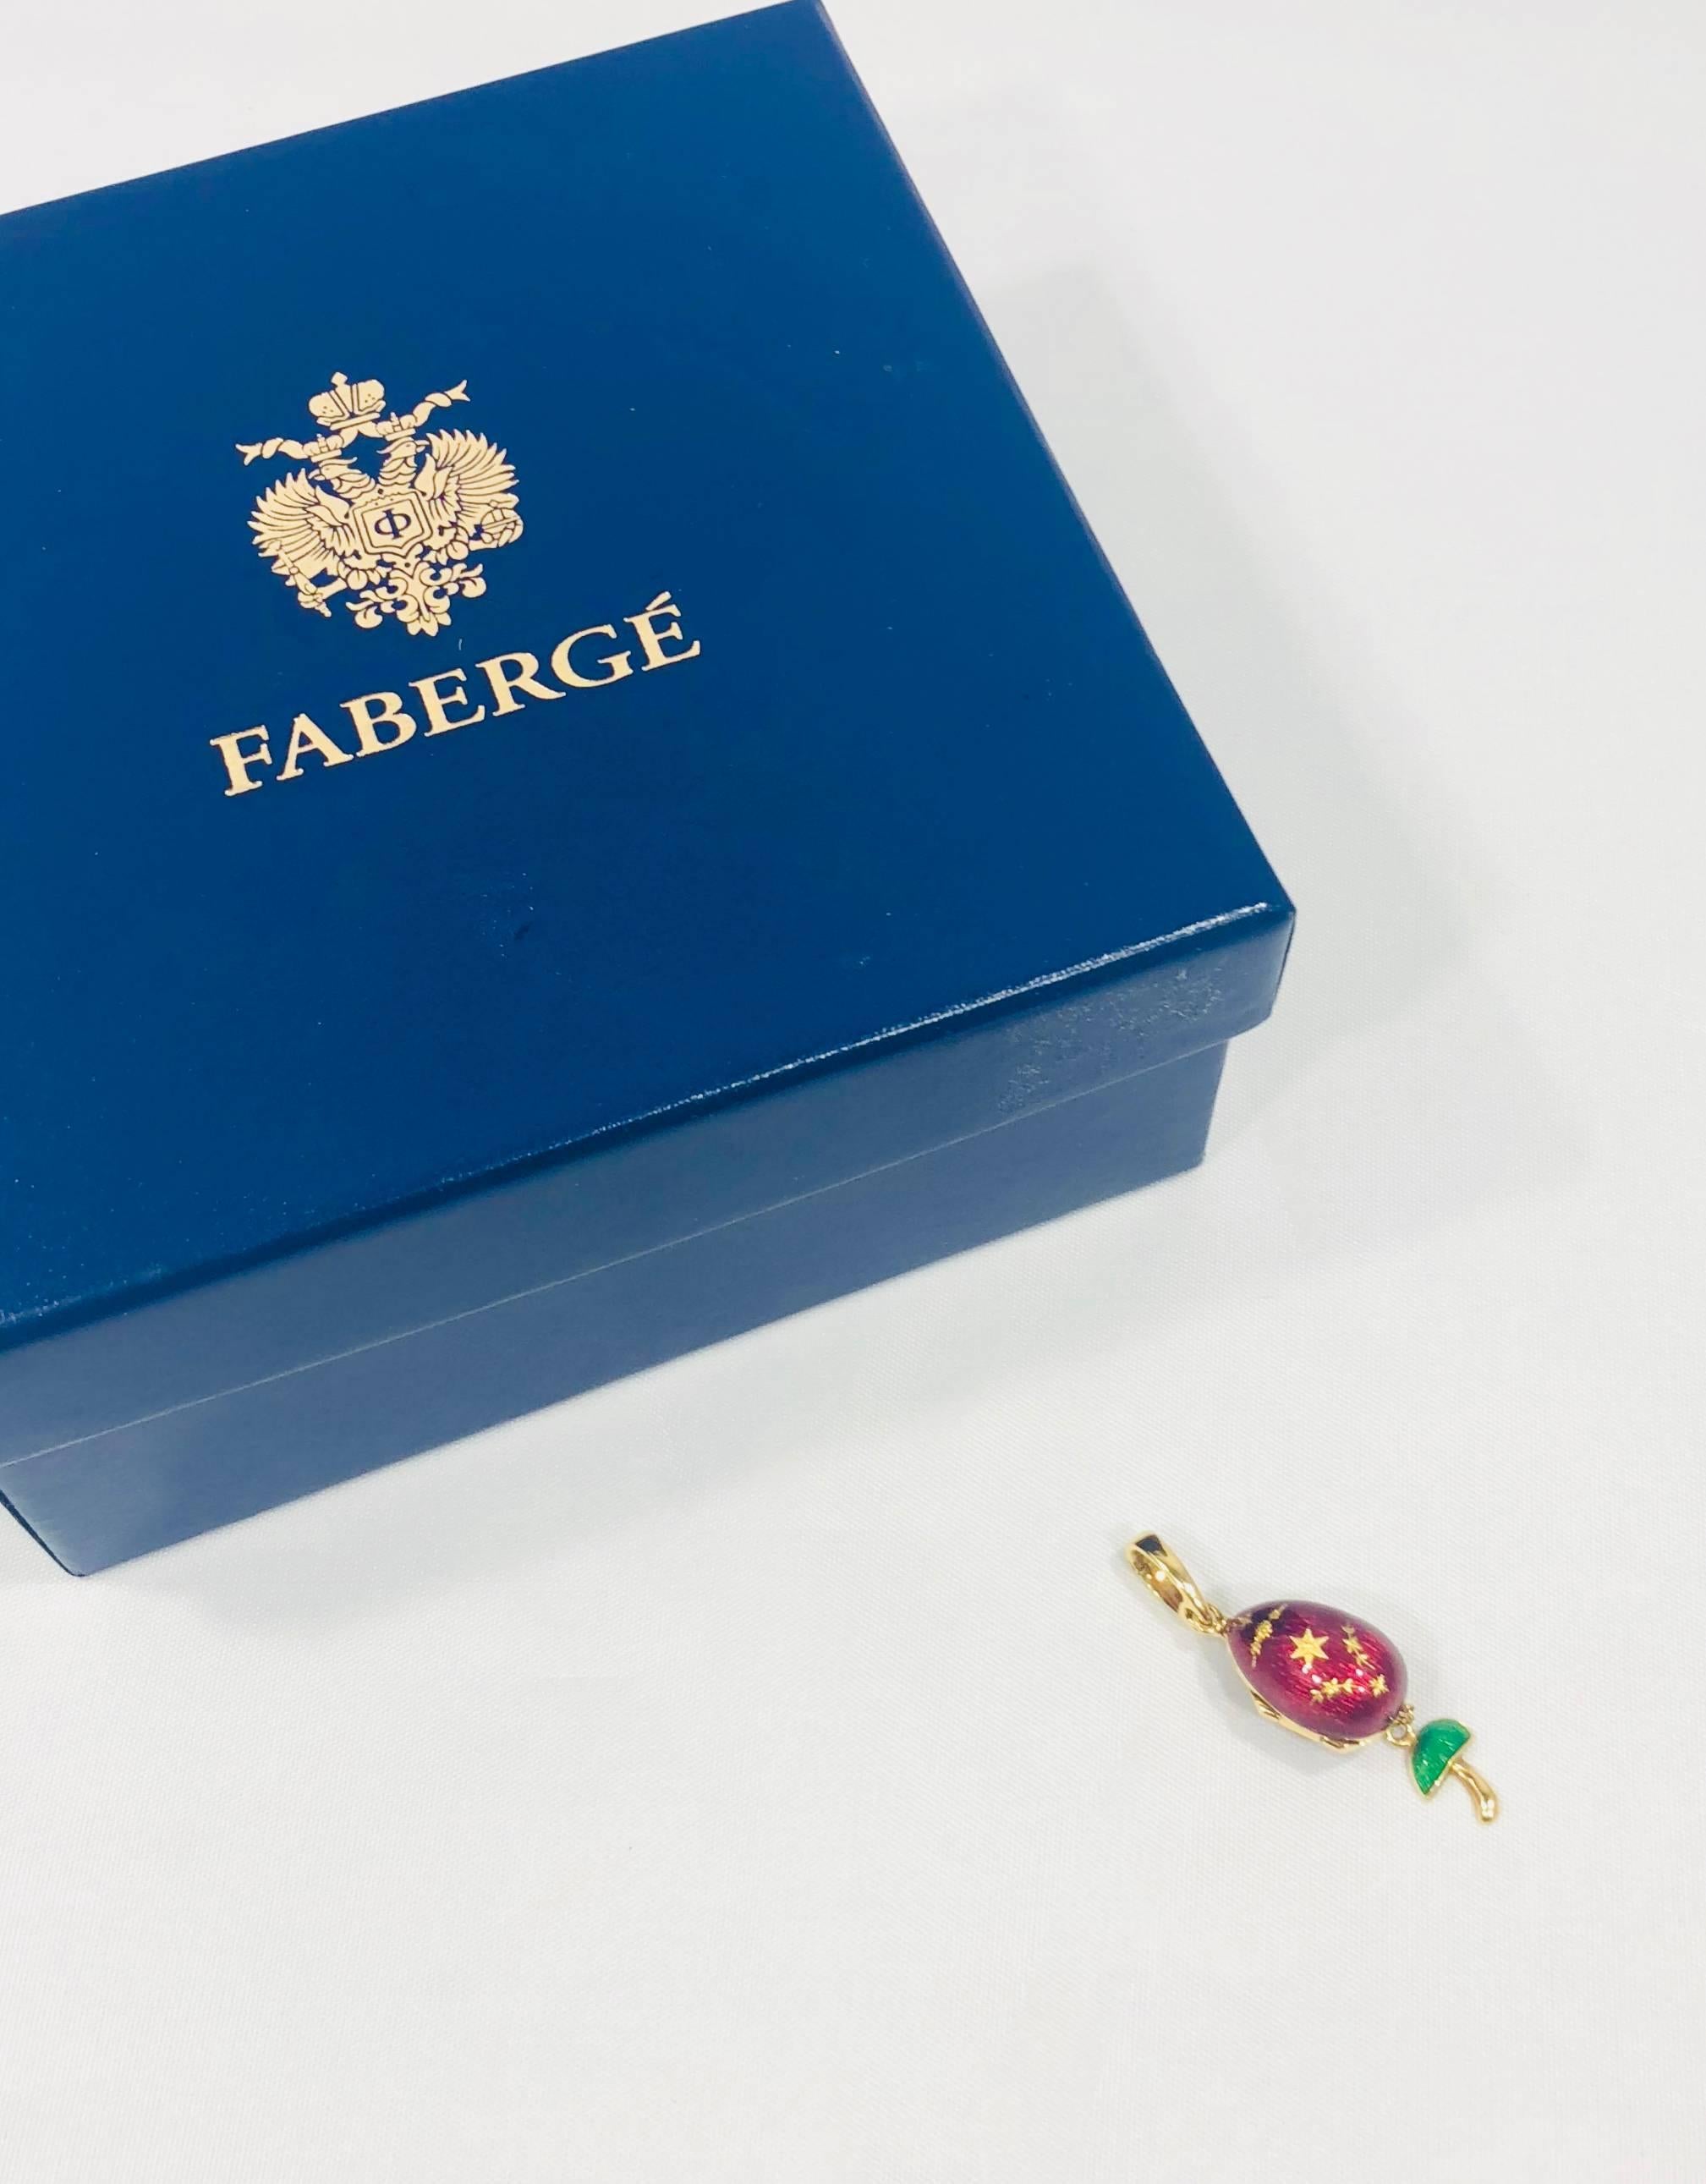 Faberge by Victor Mayer 18 karat gold and enamel egg locket pendant. This piece is created in 18 karat yellow gold and weighs 7.7 grams, 5 dwt. The piece is painted in a rich red enamel with an engraved gold design. The Egg locket opens to an